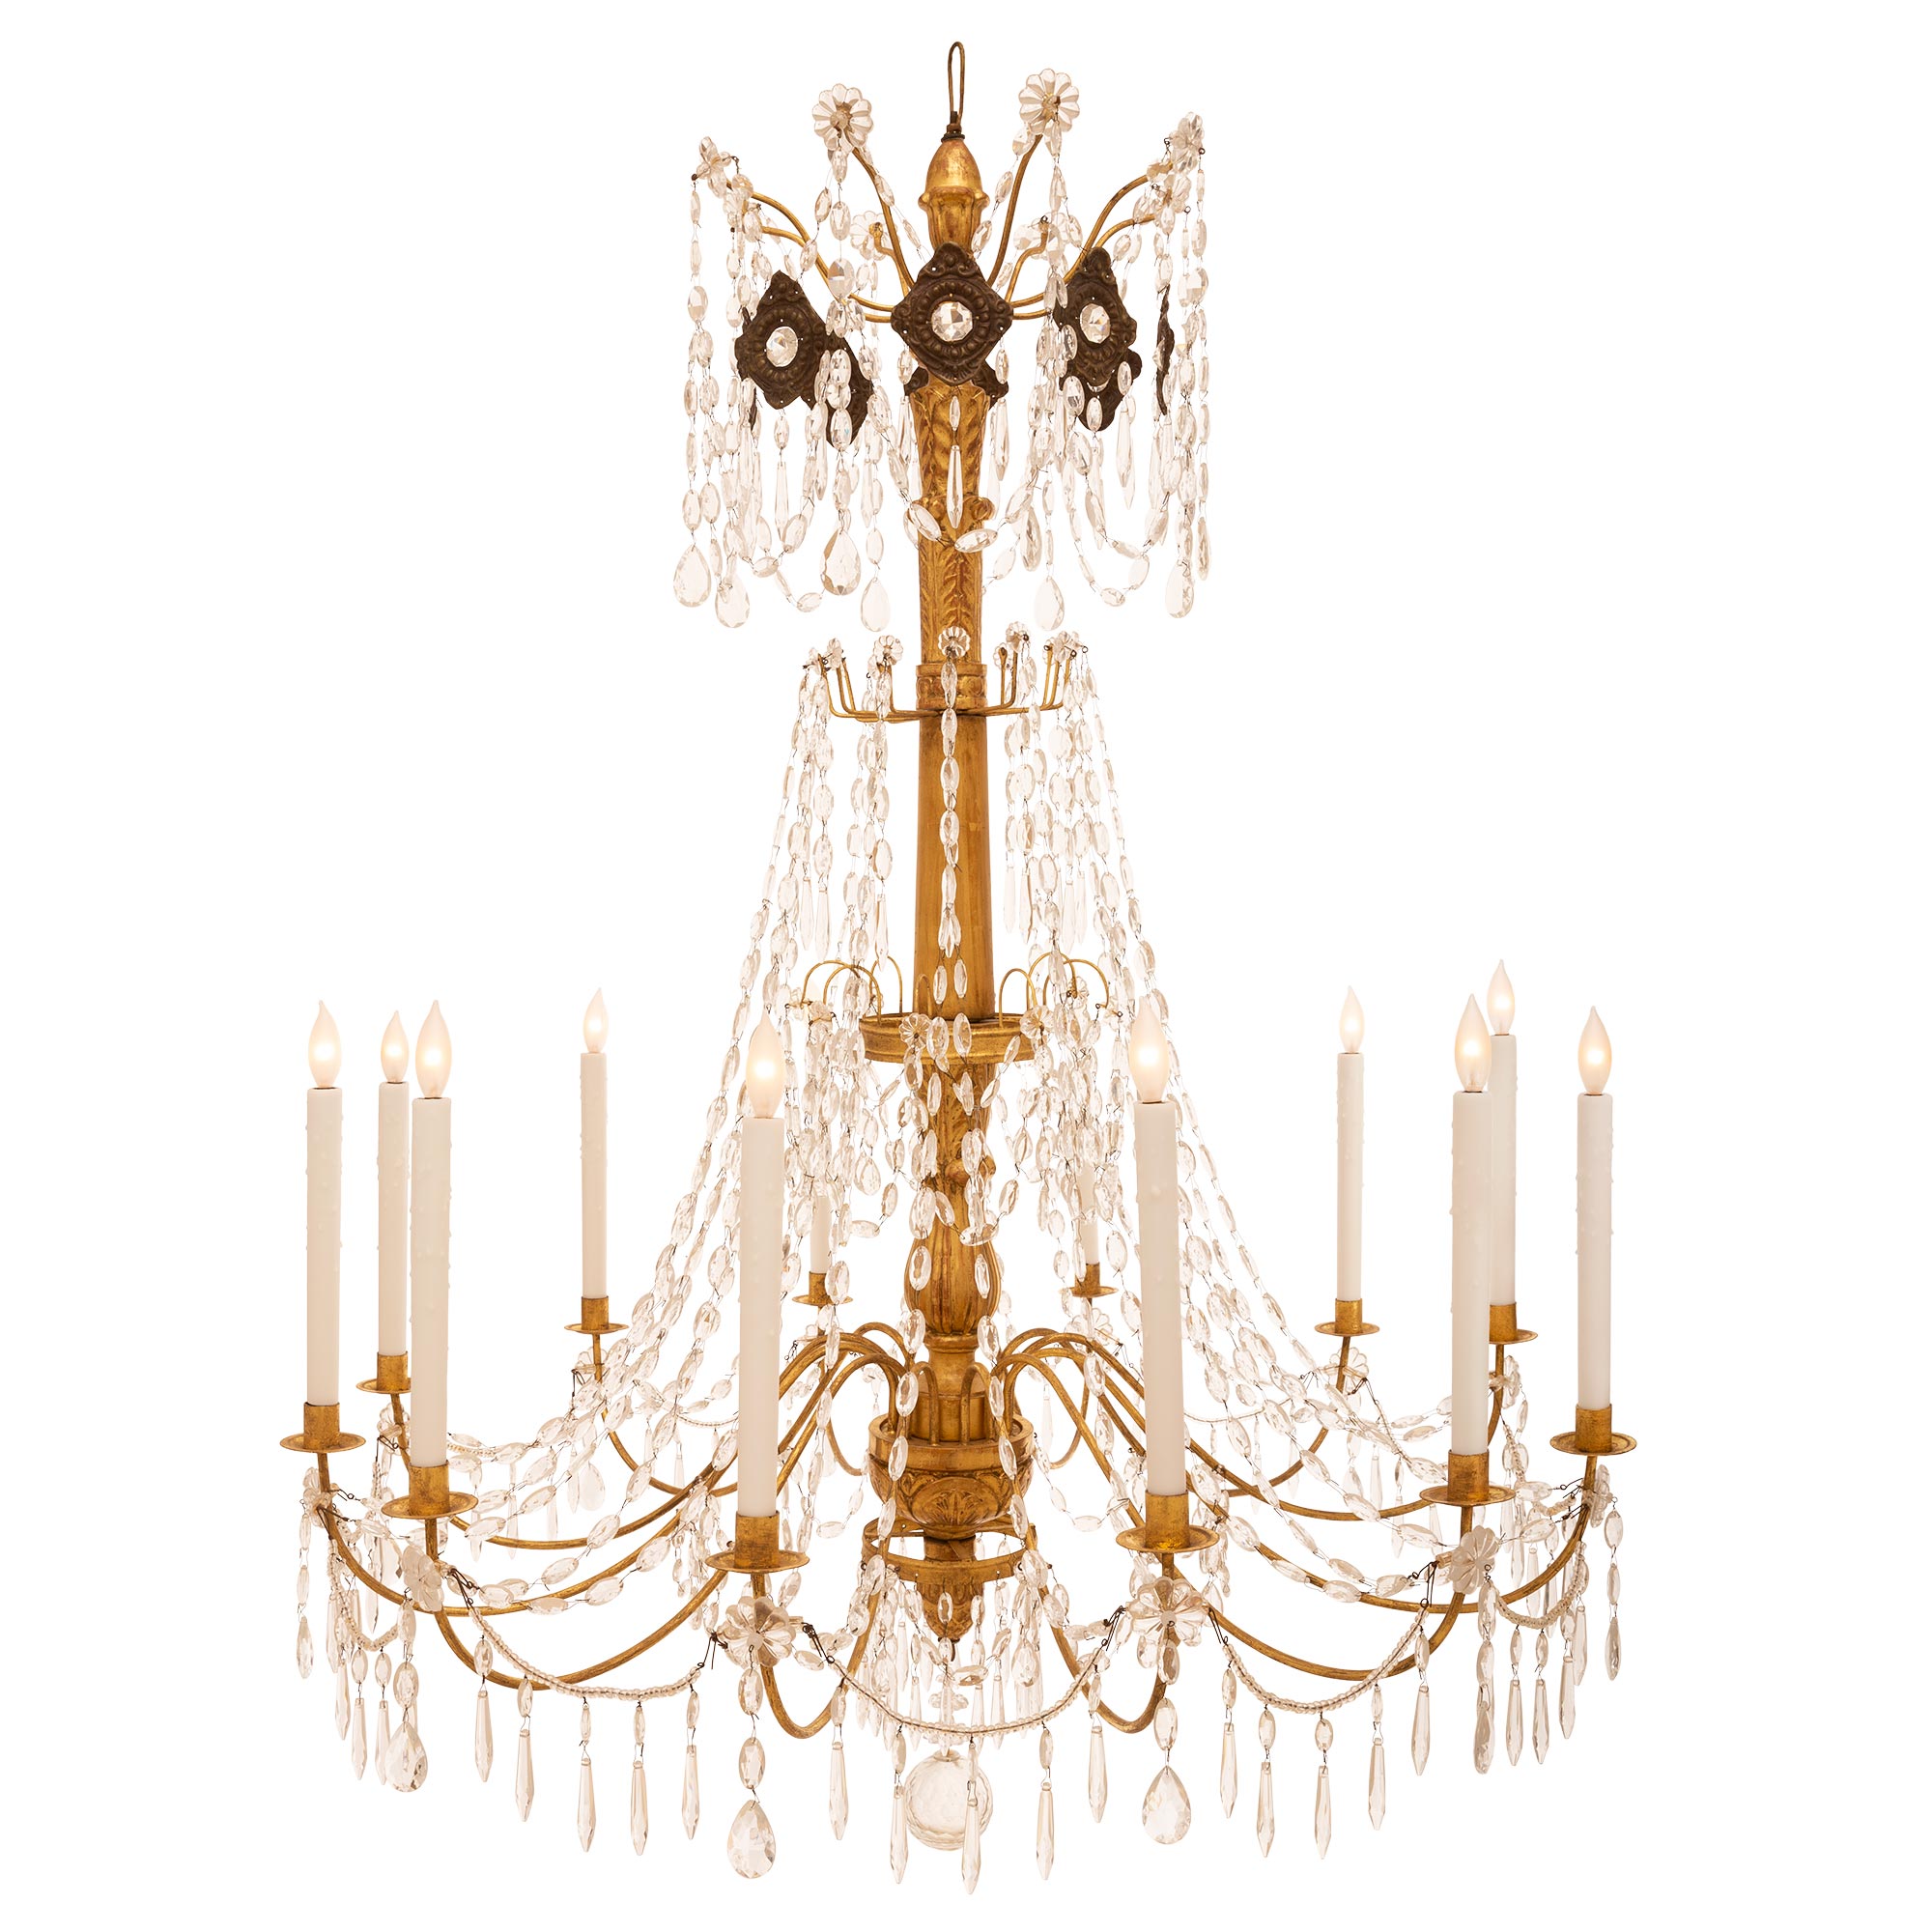 Italian 19th Century Giltwood and Gold Leaf on Metal Chandelier